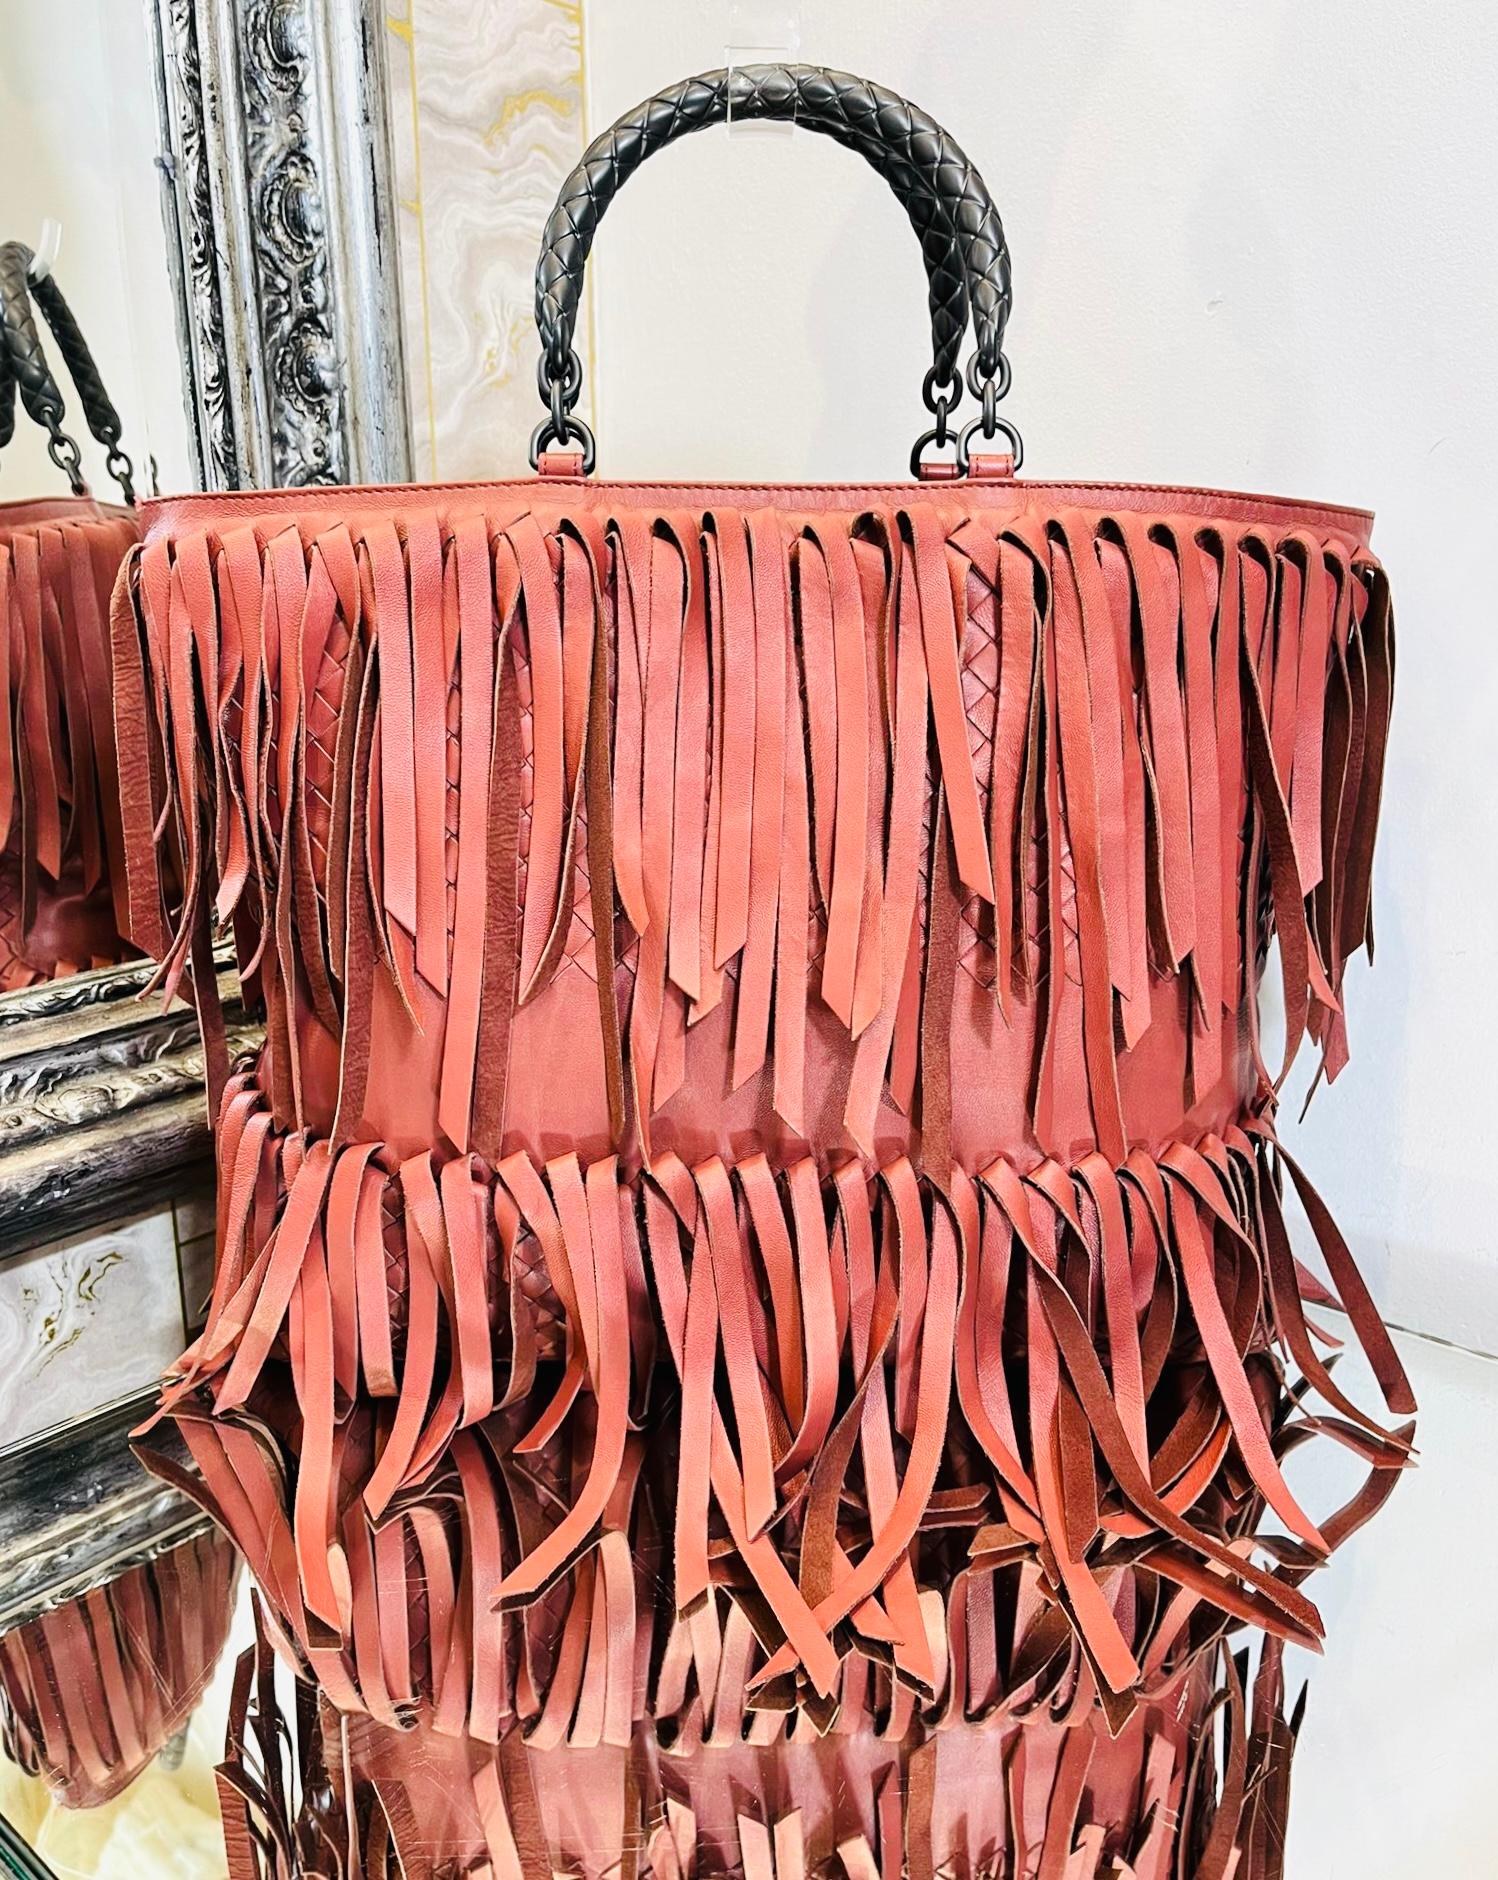 Bottega Veneta Fringe Intrecciato Leather Tote Bag

Rusty pink large bag designed with fringe details.

Styled with dual, rolled top handle crafted from the brand's signature Intrecciato leather in metallic grey.

Having spacious suede line interior